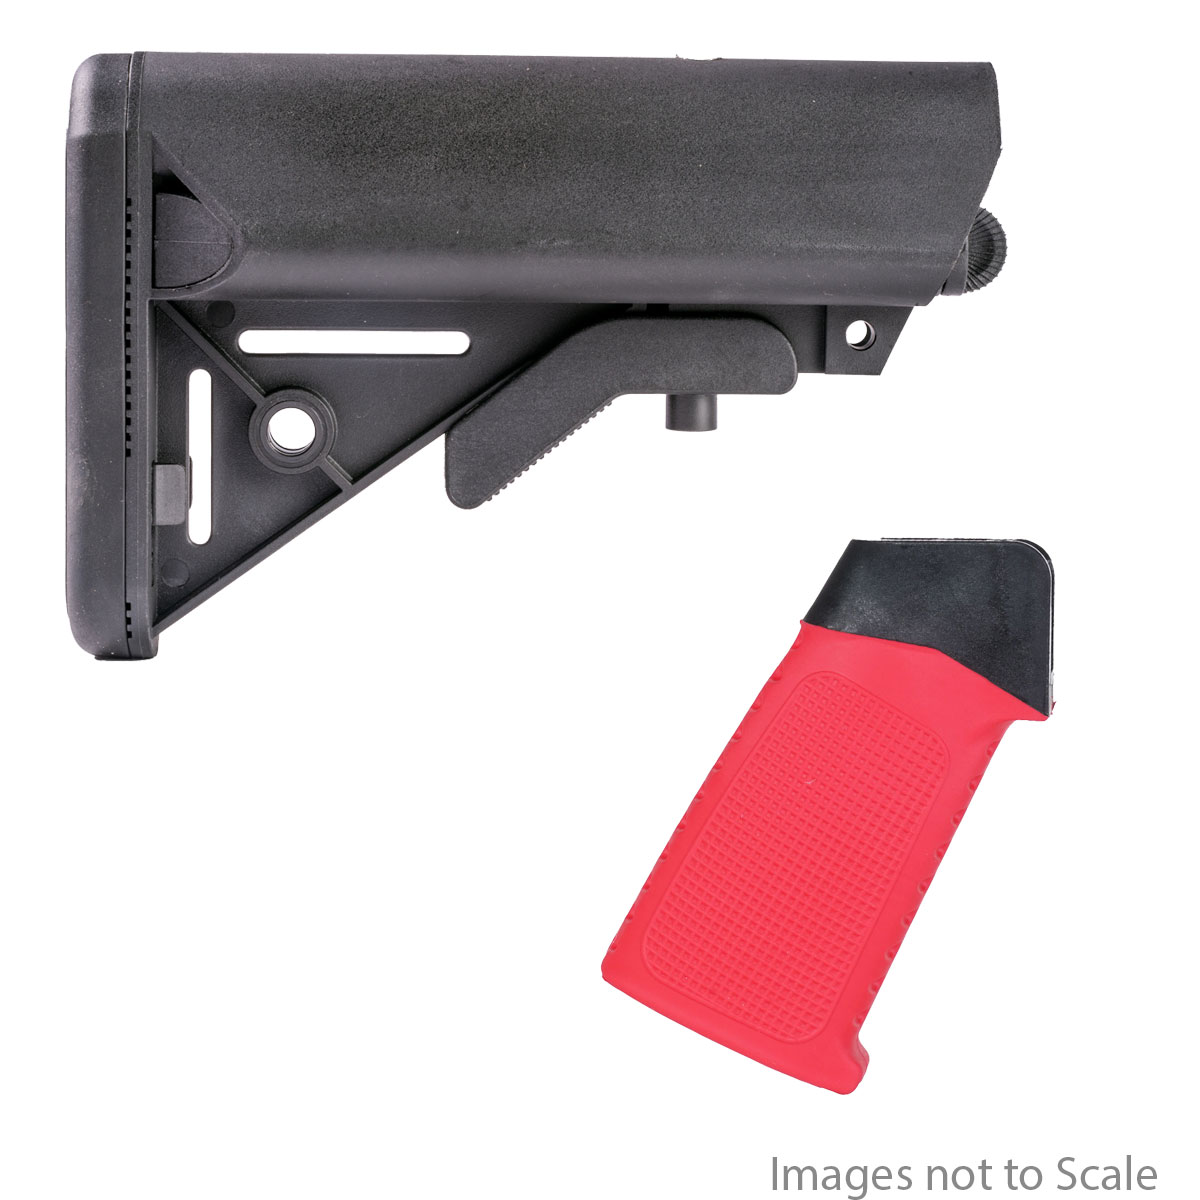 Furniture Upgrade Kit: Team Accessories Corp AR15 Grip Window Grip Straight Top Textured/Ribbed Red  + Gauntlet Arms SOPMOD Style Collapsible Stock with Storage Compartments